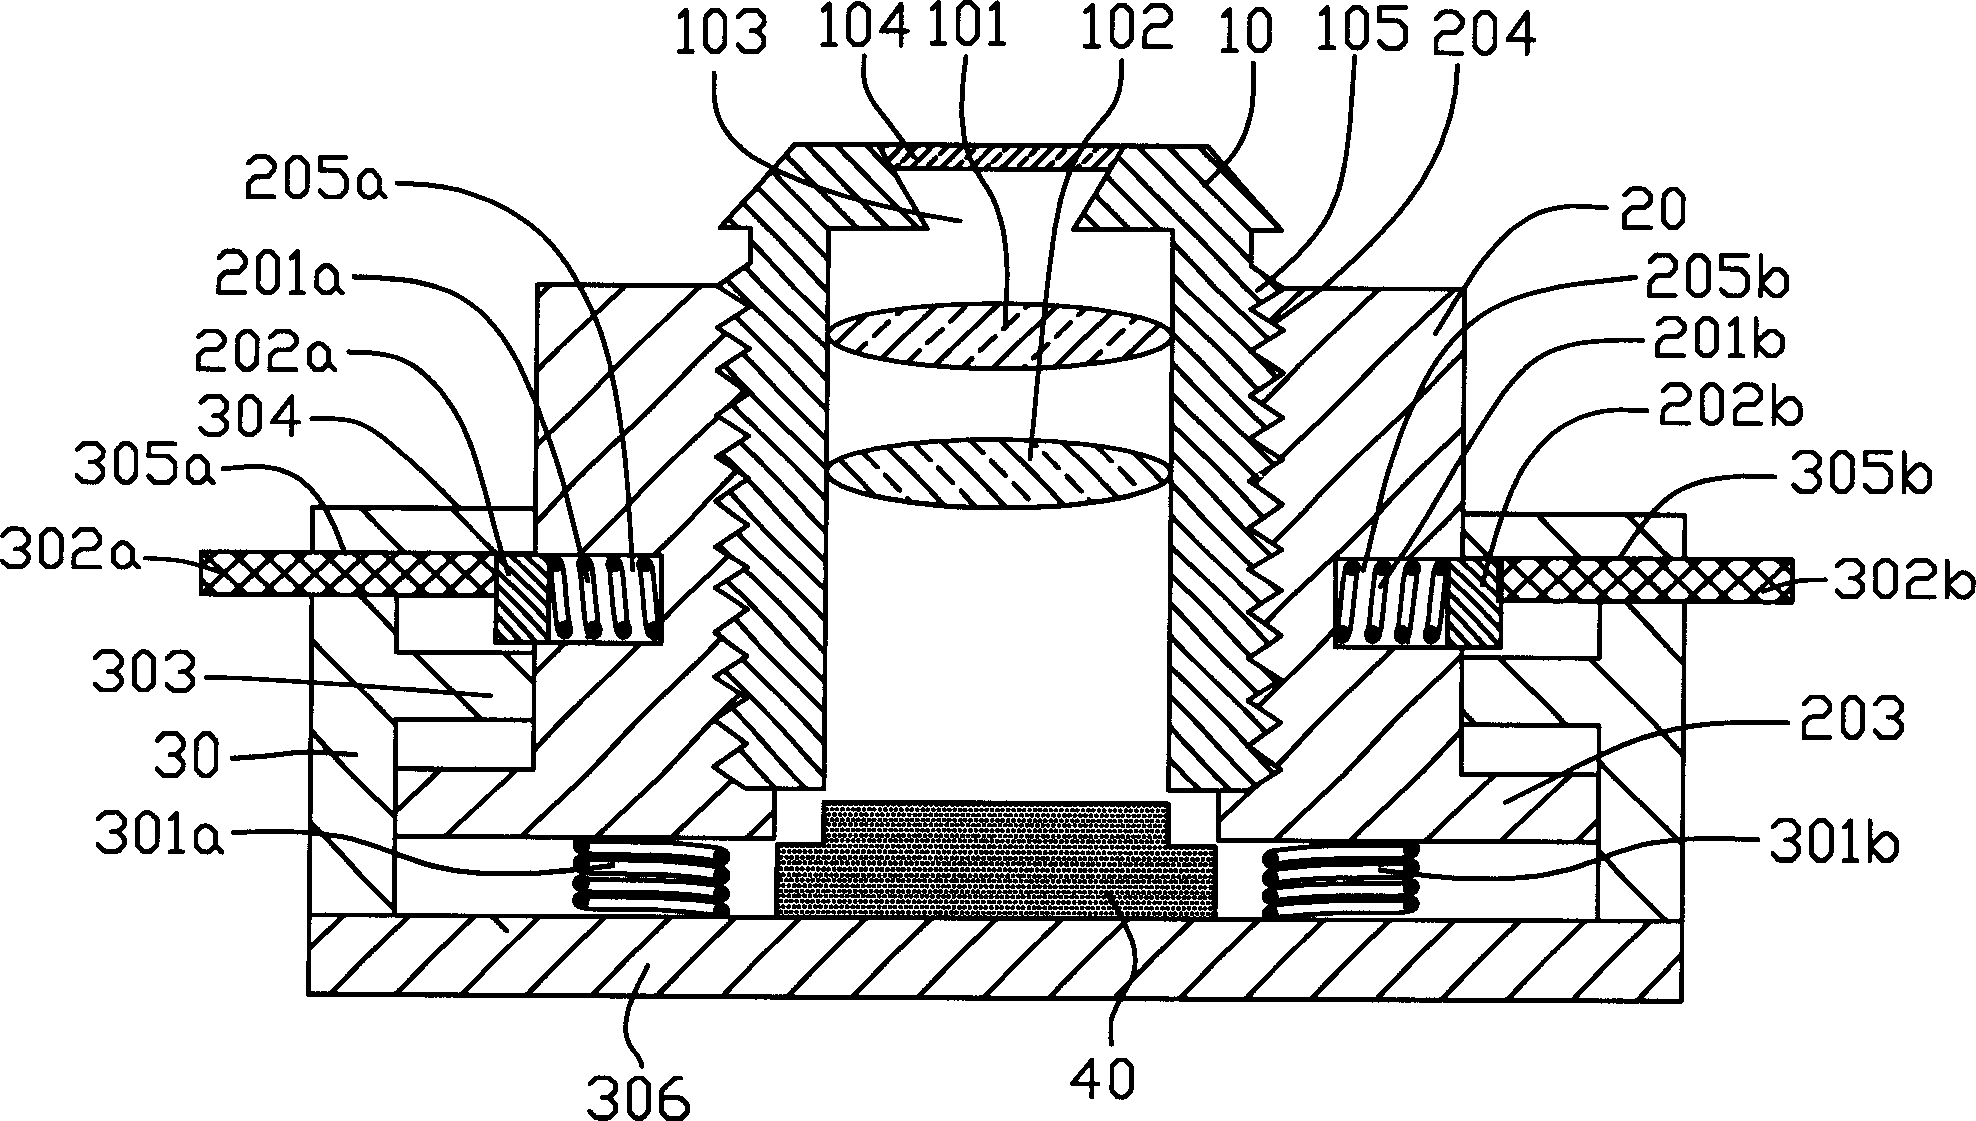 Two section type focusing mechanism